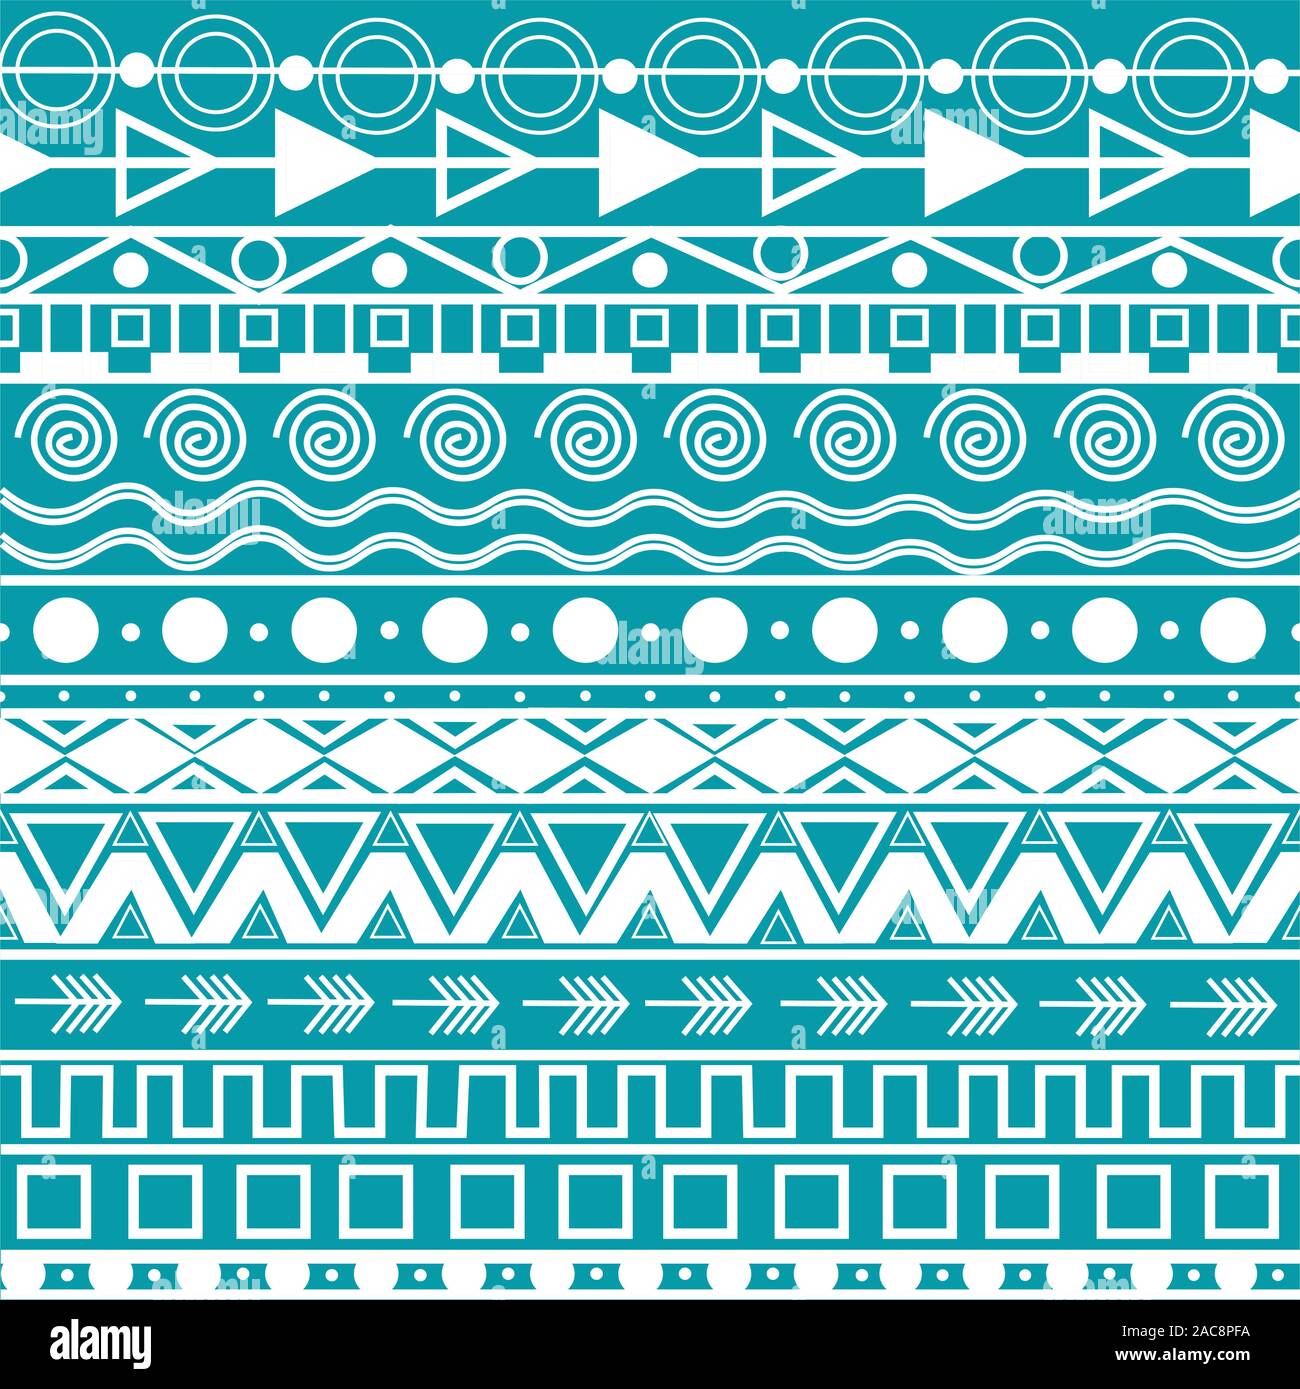 Horizontal lines seamless aztec pattern. Bohemian hippie elements-zigzag, triangles, circles and lines, tribal decoration for different clothes Stock Vector